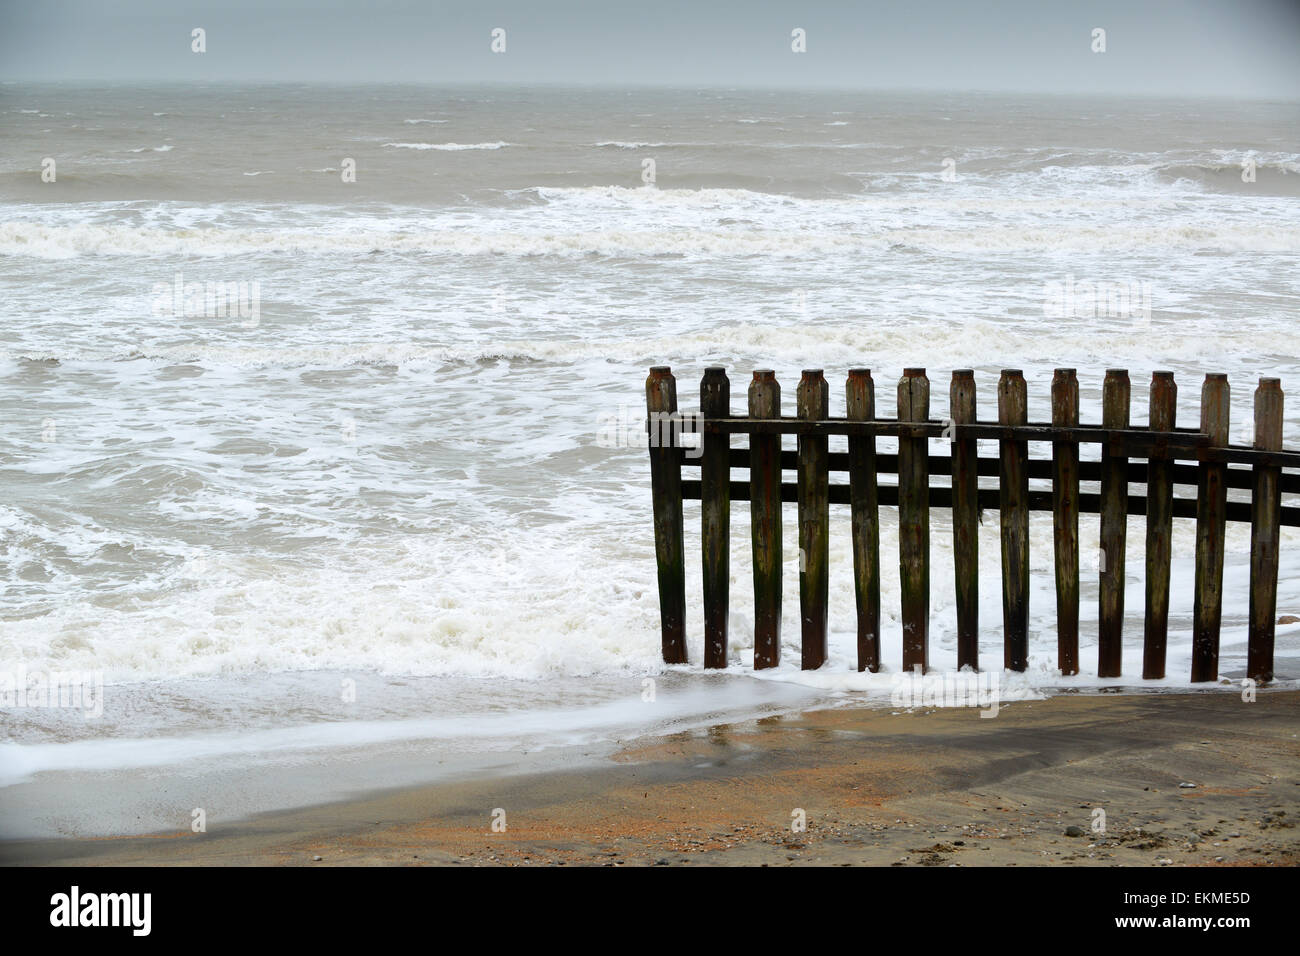 Wooden sea defence defences on Ventnor beach Isle of Wight Stock Photo